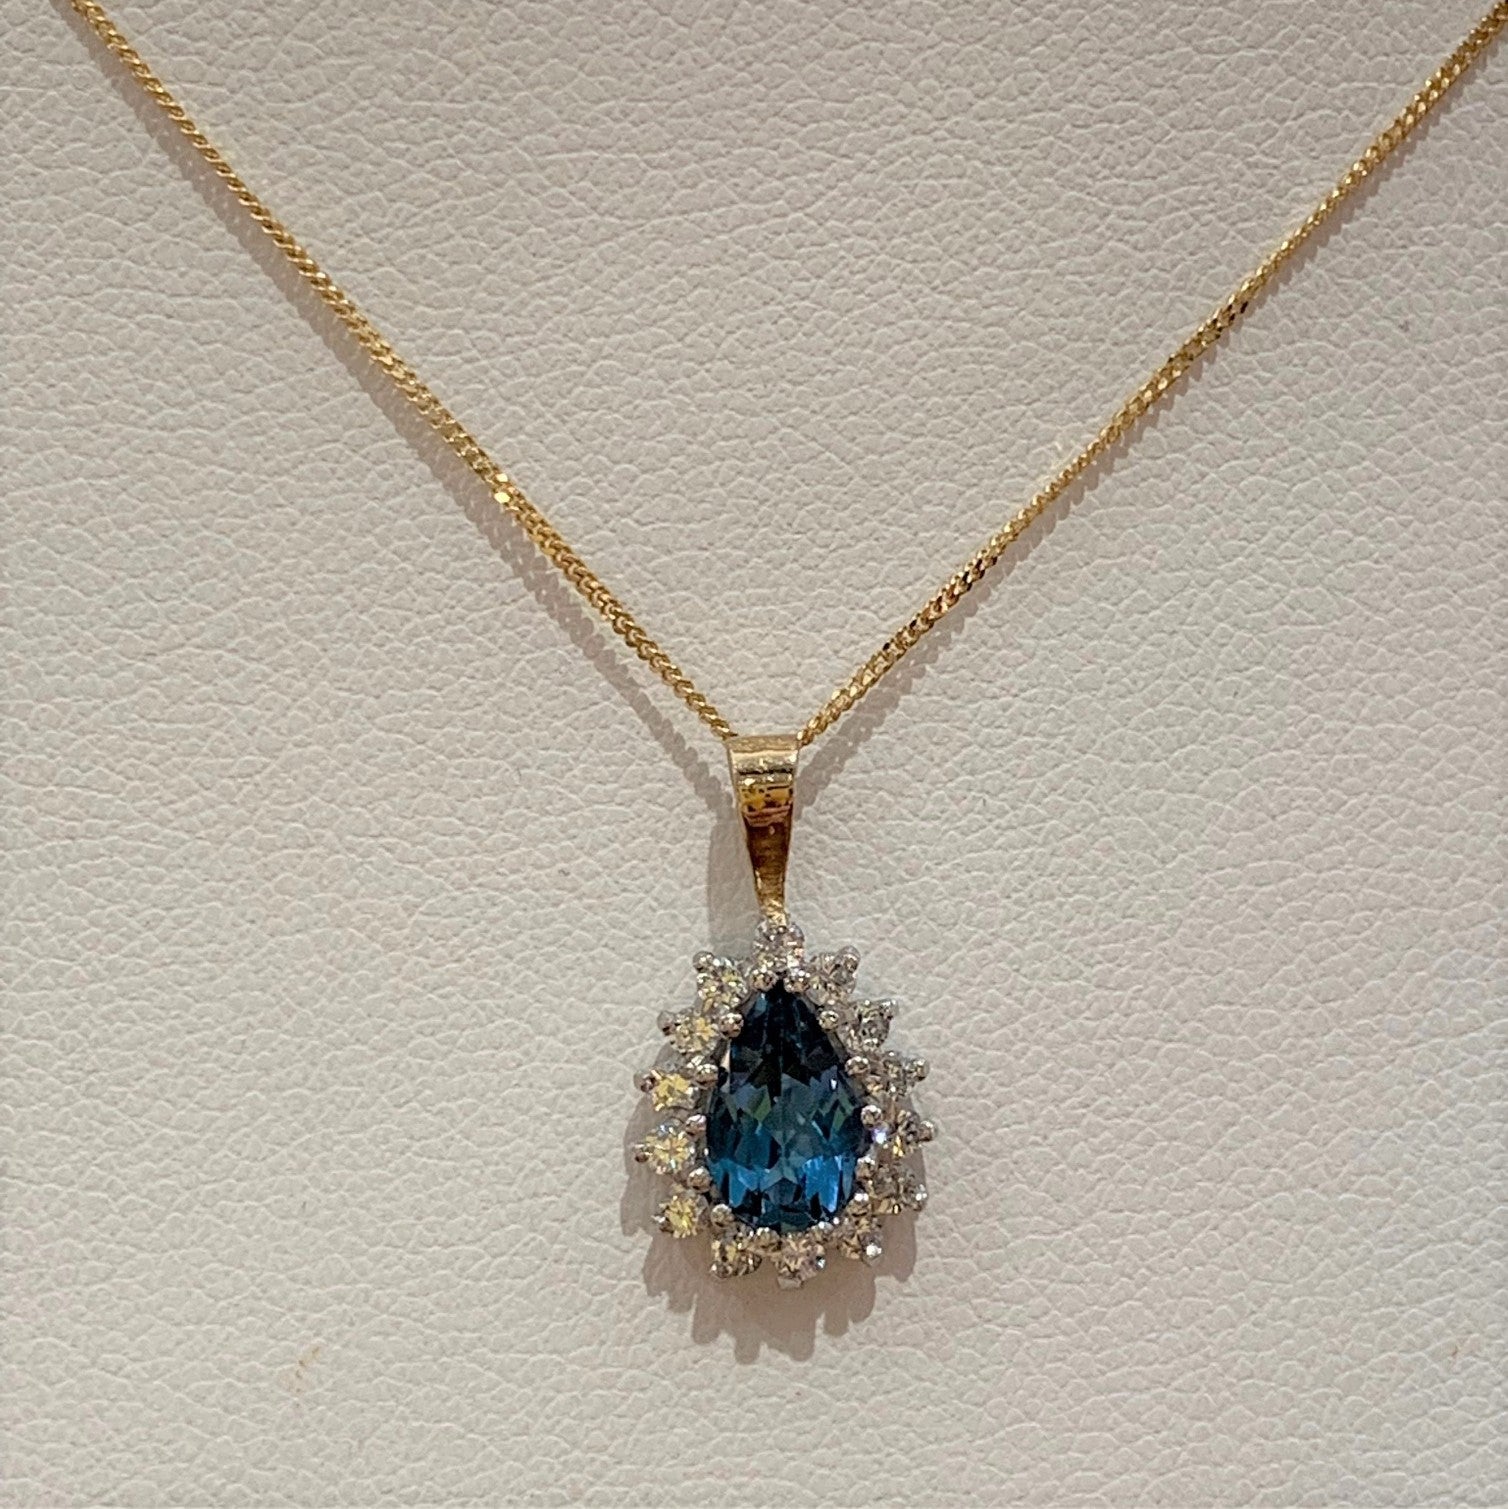 Secondhand 9ct Gold Topaz and Cubic Zirconia Necklace – Plants The